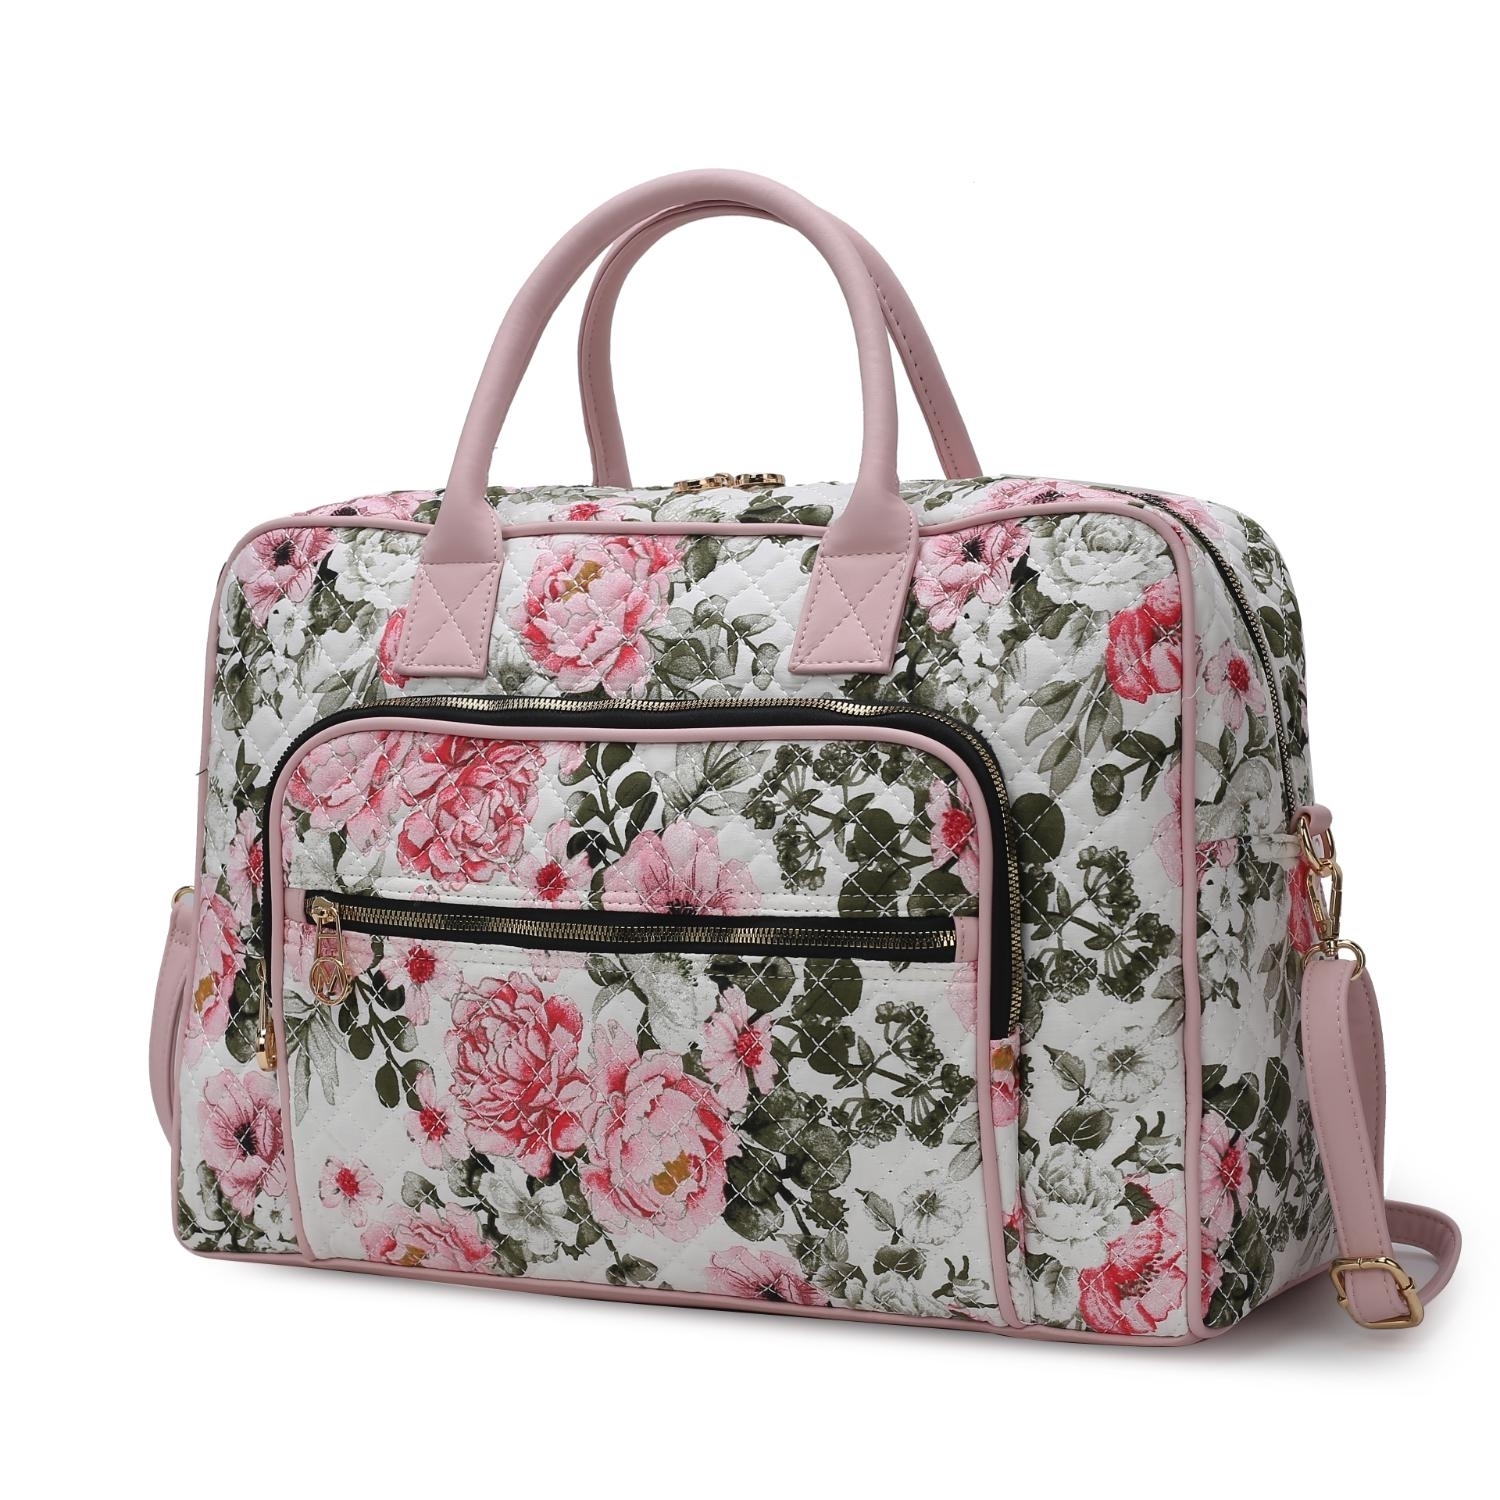 MKF Collection Jayla Quilted Cotton Botanical Pattern Women's Duffle Bag By Mia K - White